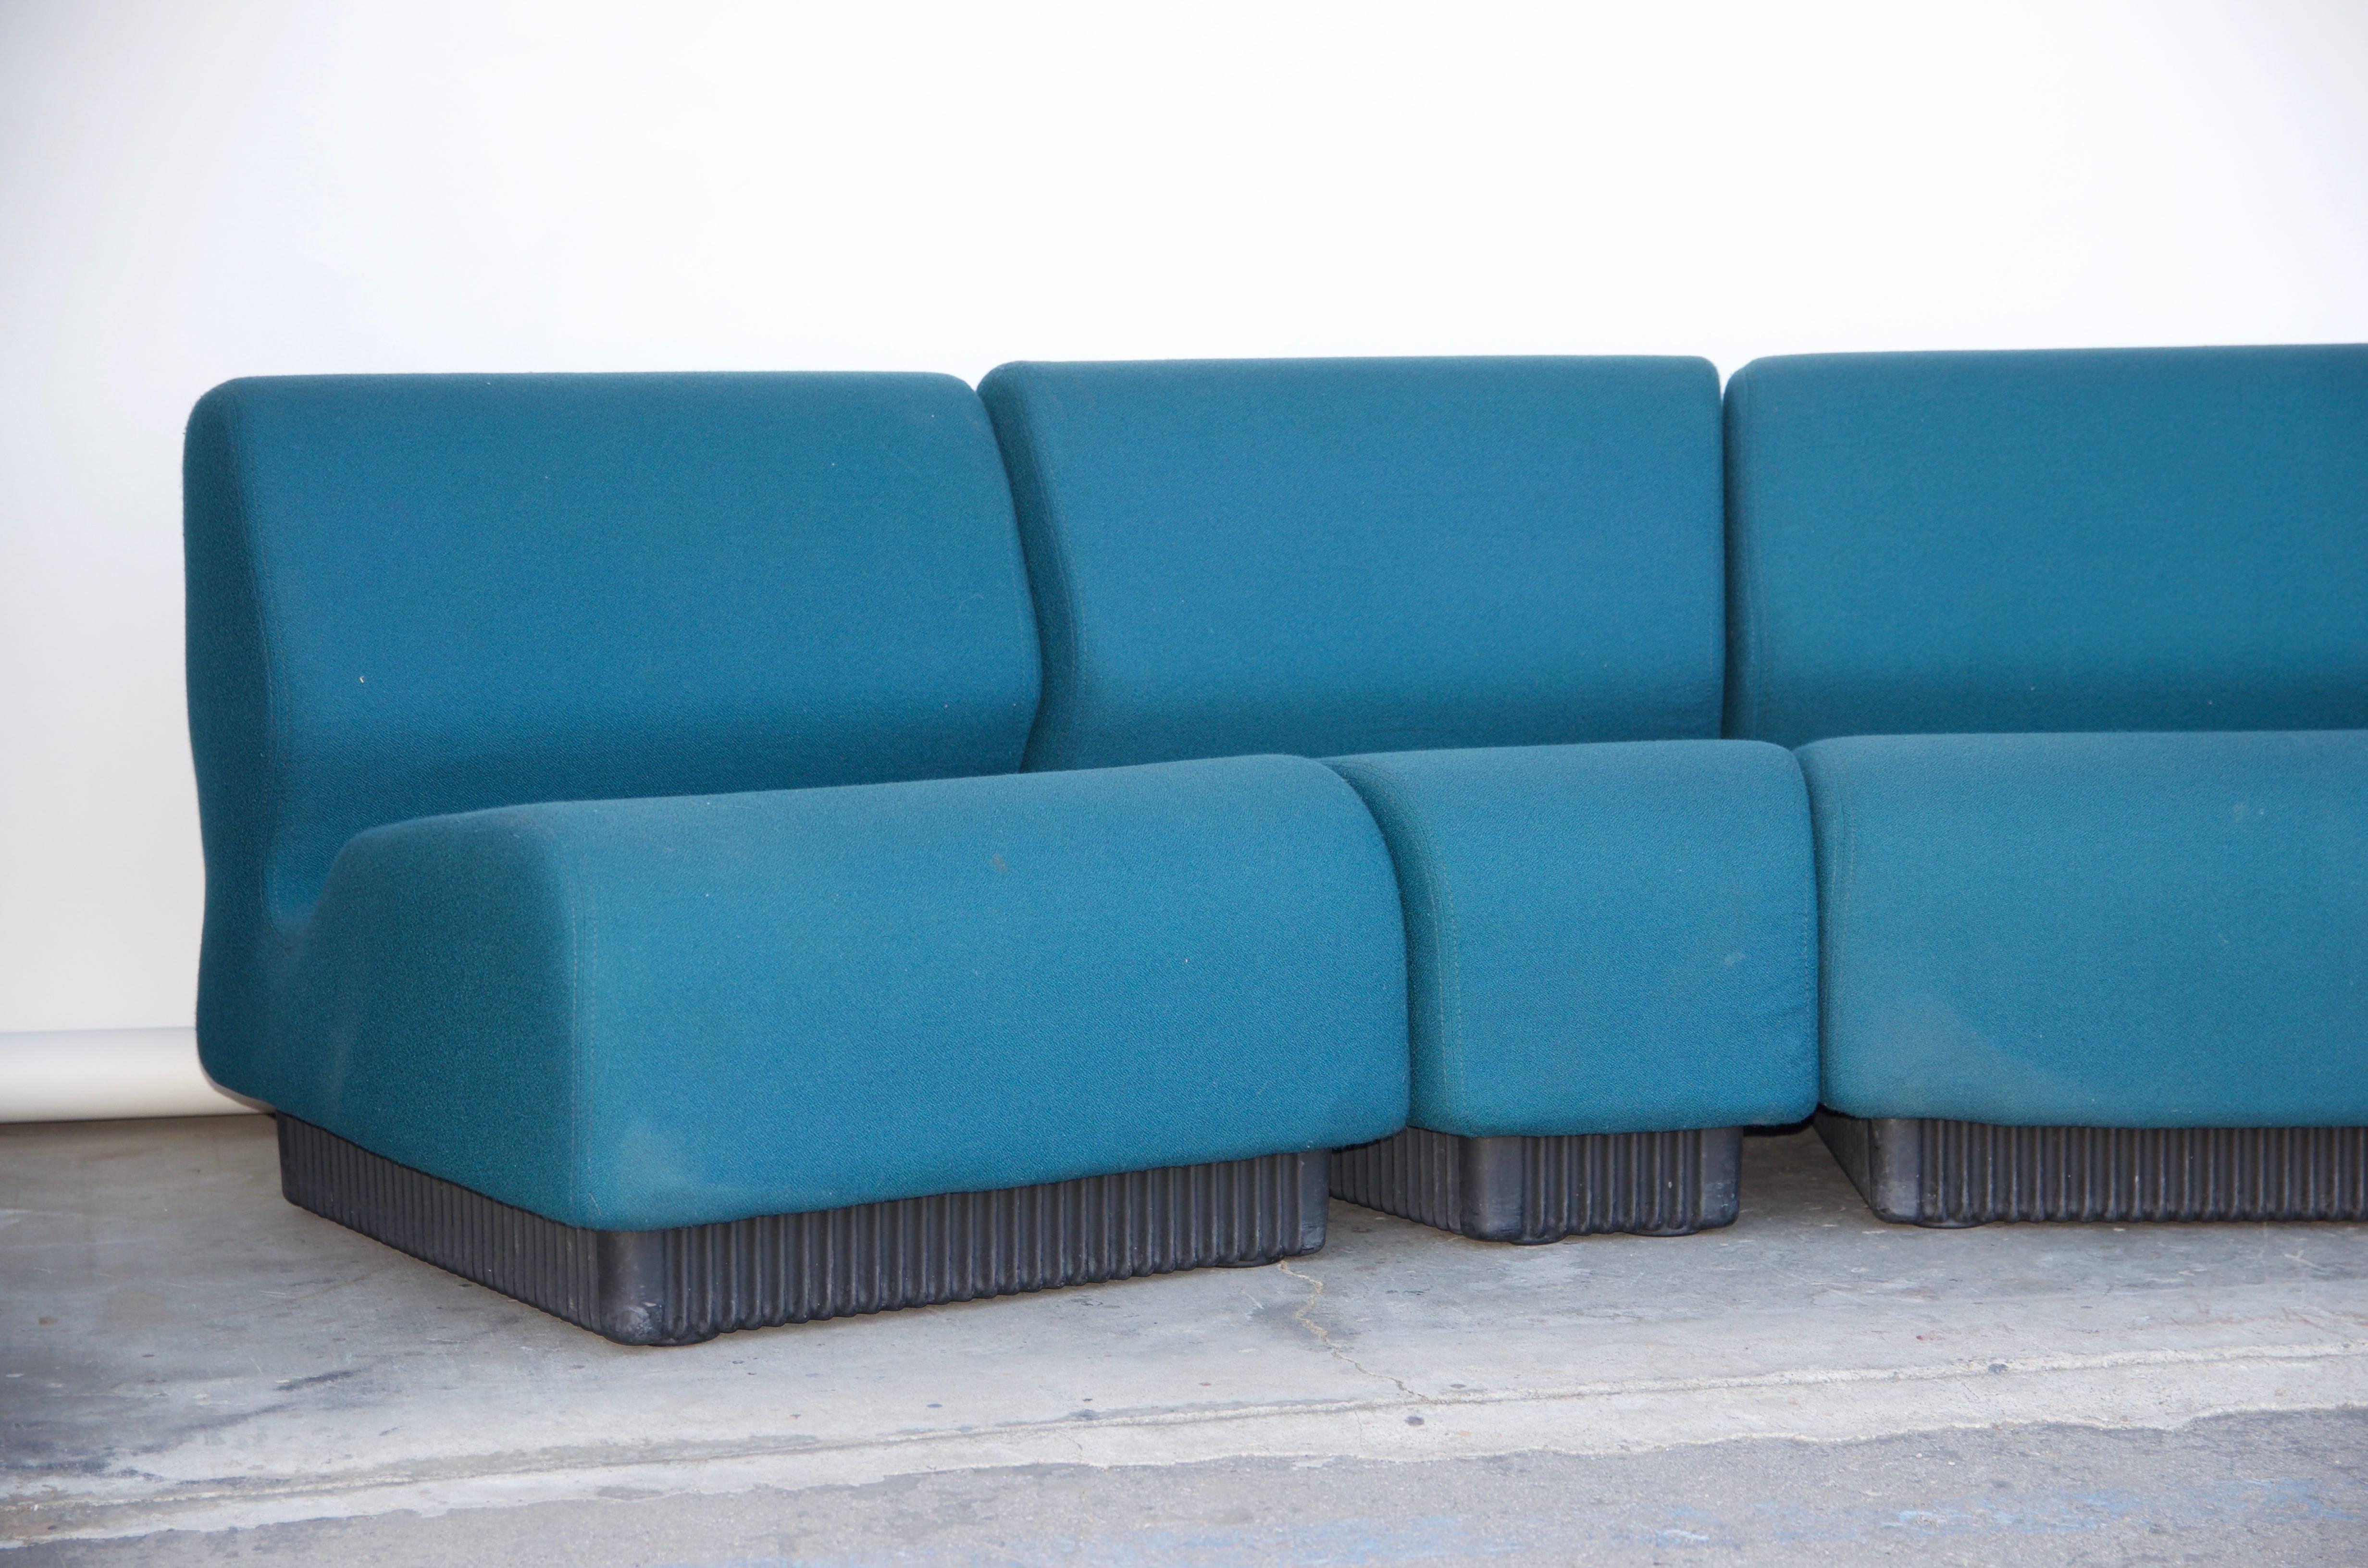 Modular settee by Don Chadwick for Herman Miller. Can also be used separately in the room.

Original tags.

See images of the lobby of the ACE hotel in Palm Springs for a room setting.

The two rectangular elements are 28 in. wide x 31 in.